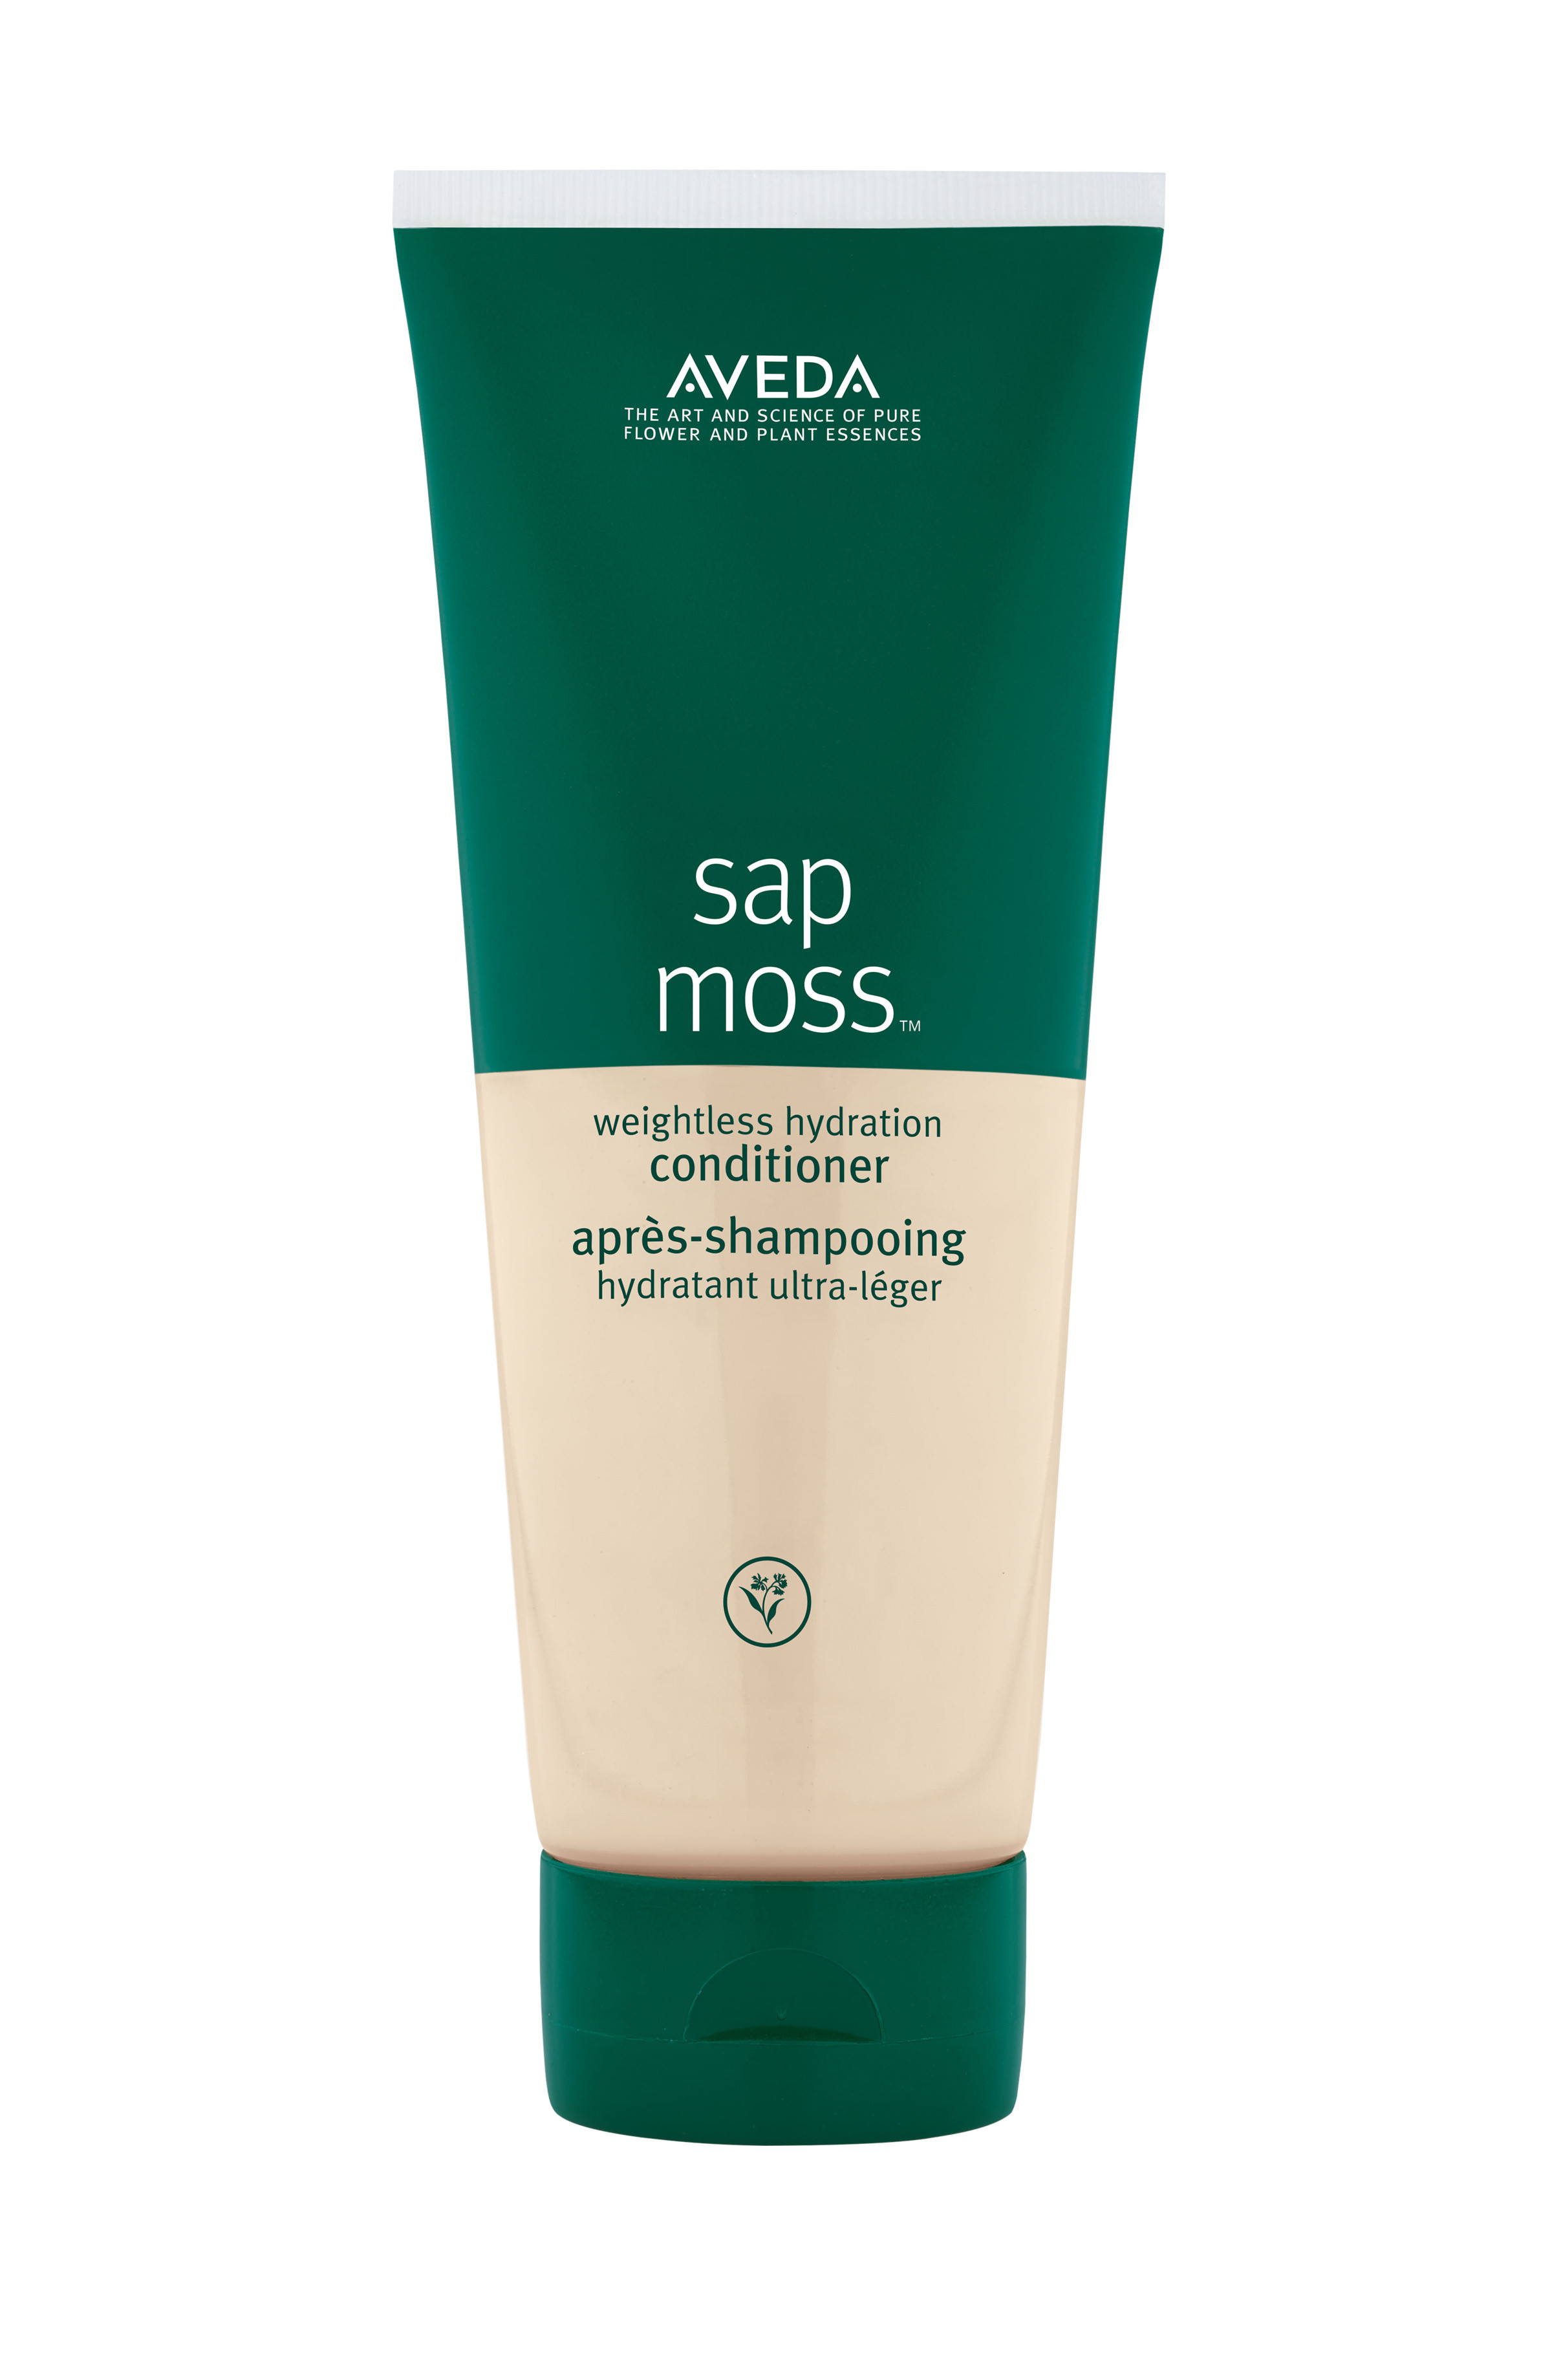 Aveda sap moss weightless hydration conditioner 200 ml, Green, large image number 0